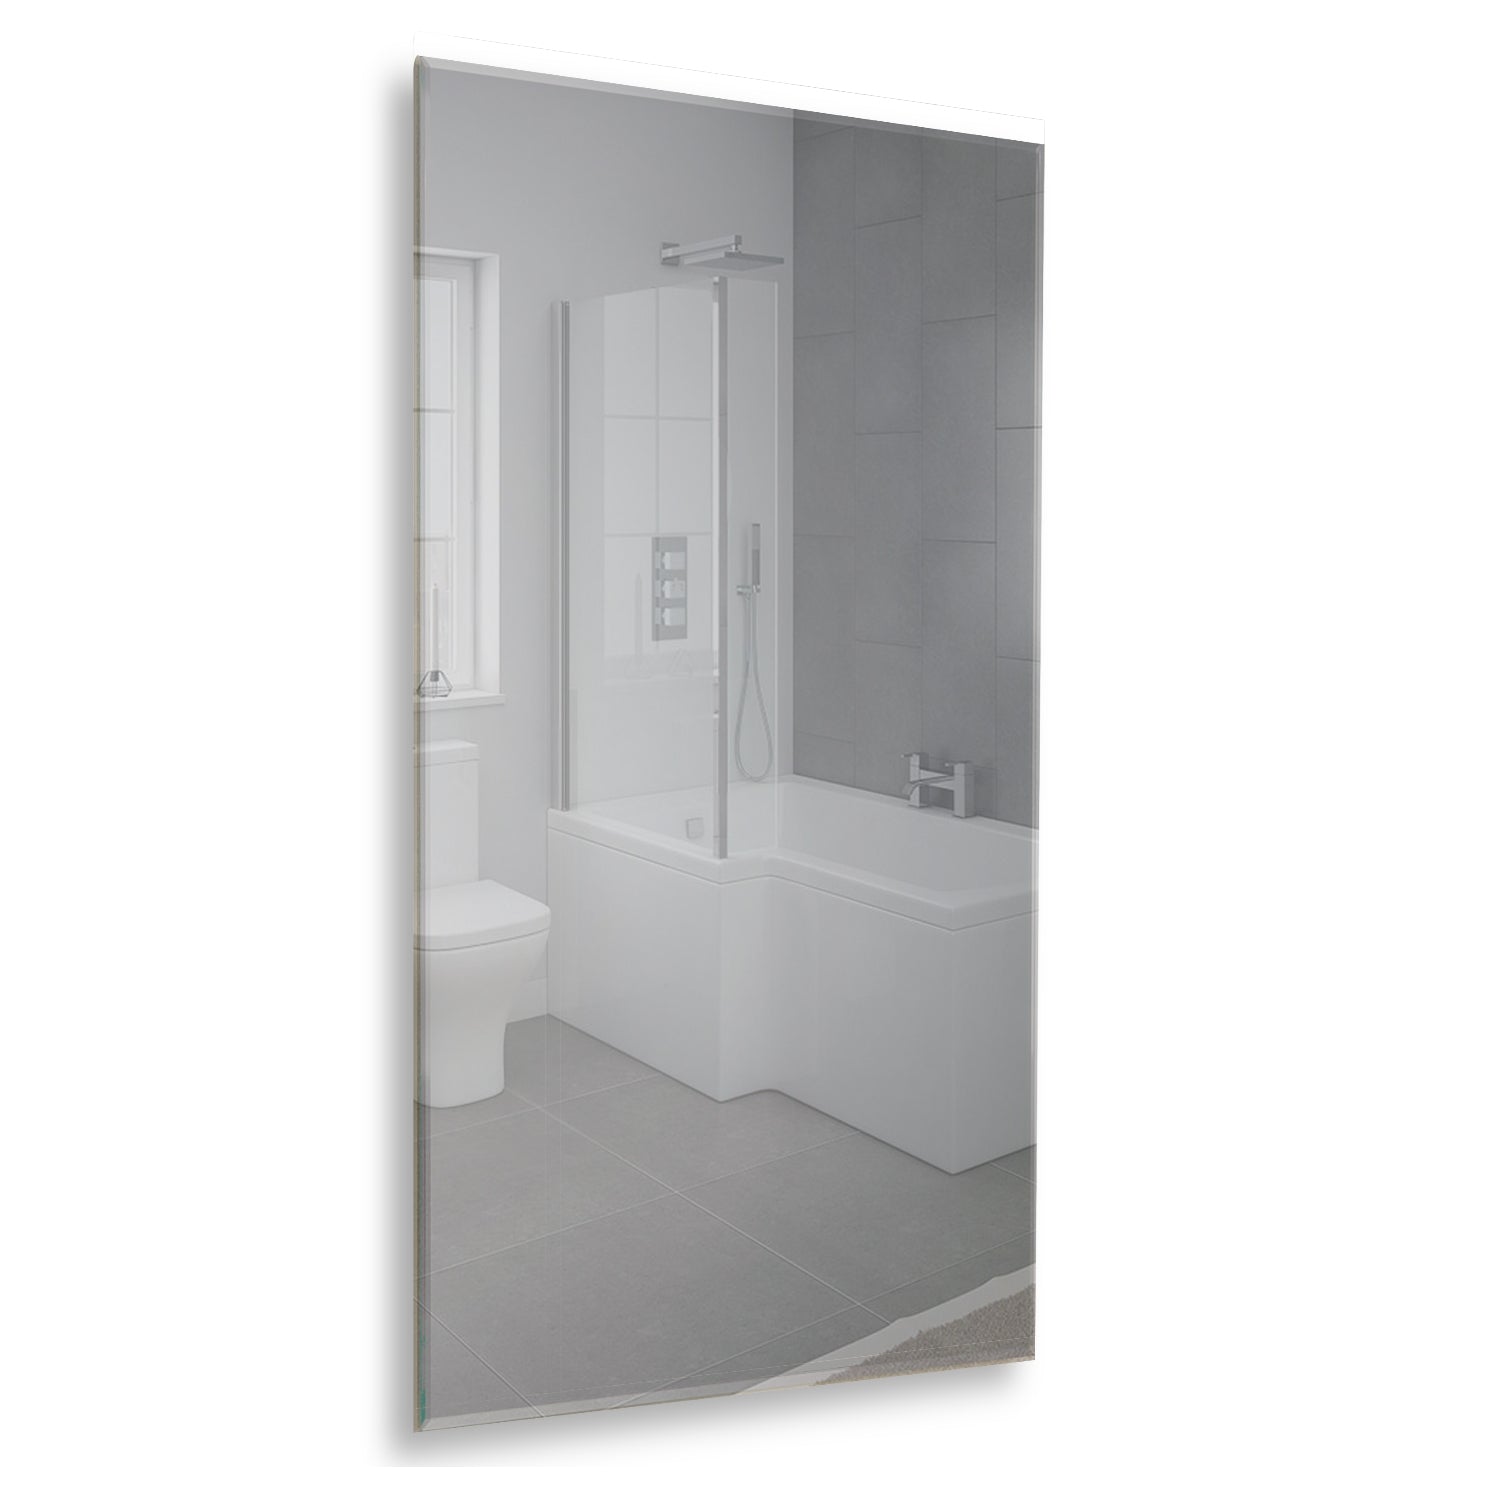 700w Solstice Mirrored Infrared Heating Panel